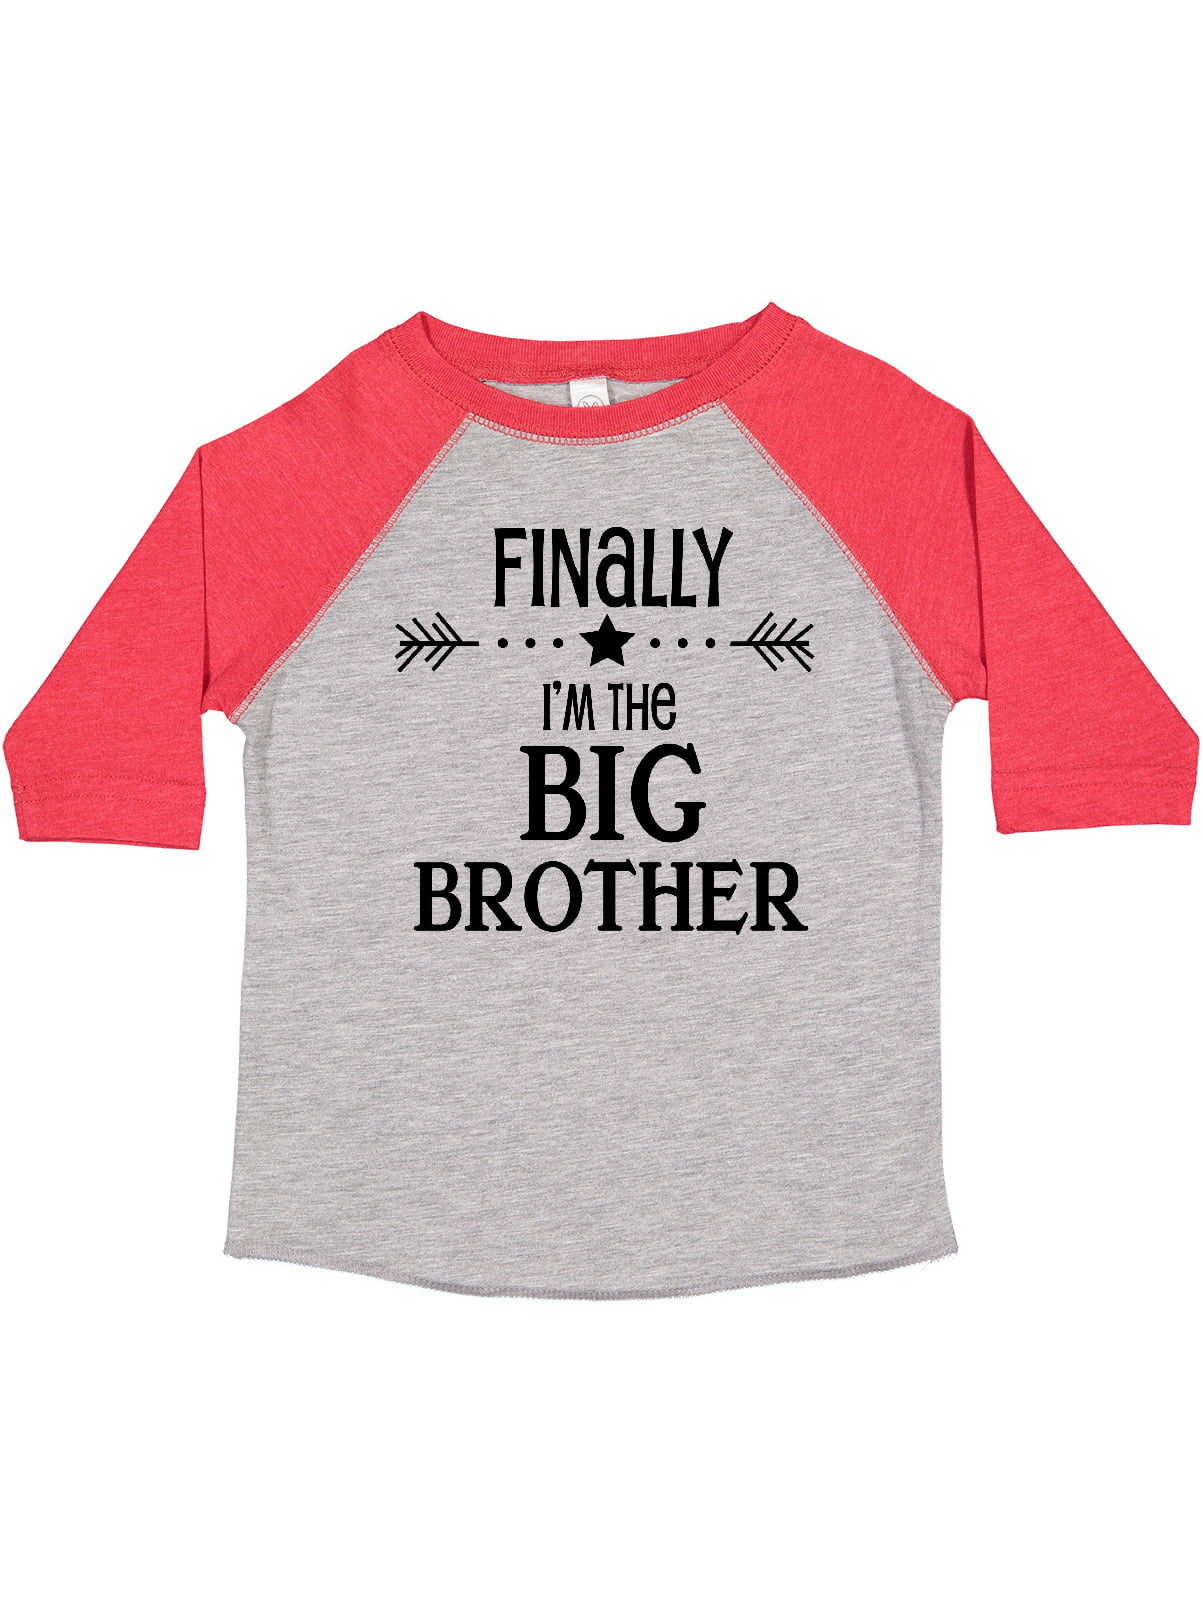 I Love My Big Brother So Very Much Toddler/Kids Short Sleeve T-Shirt 